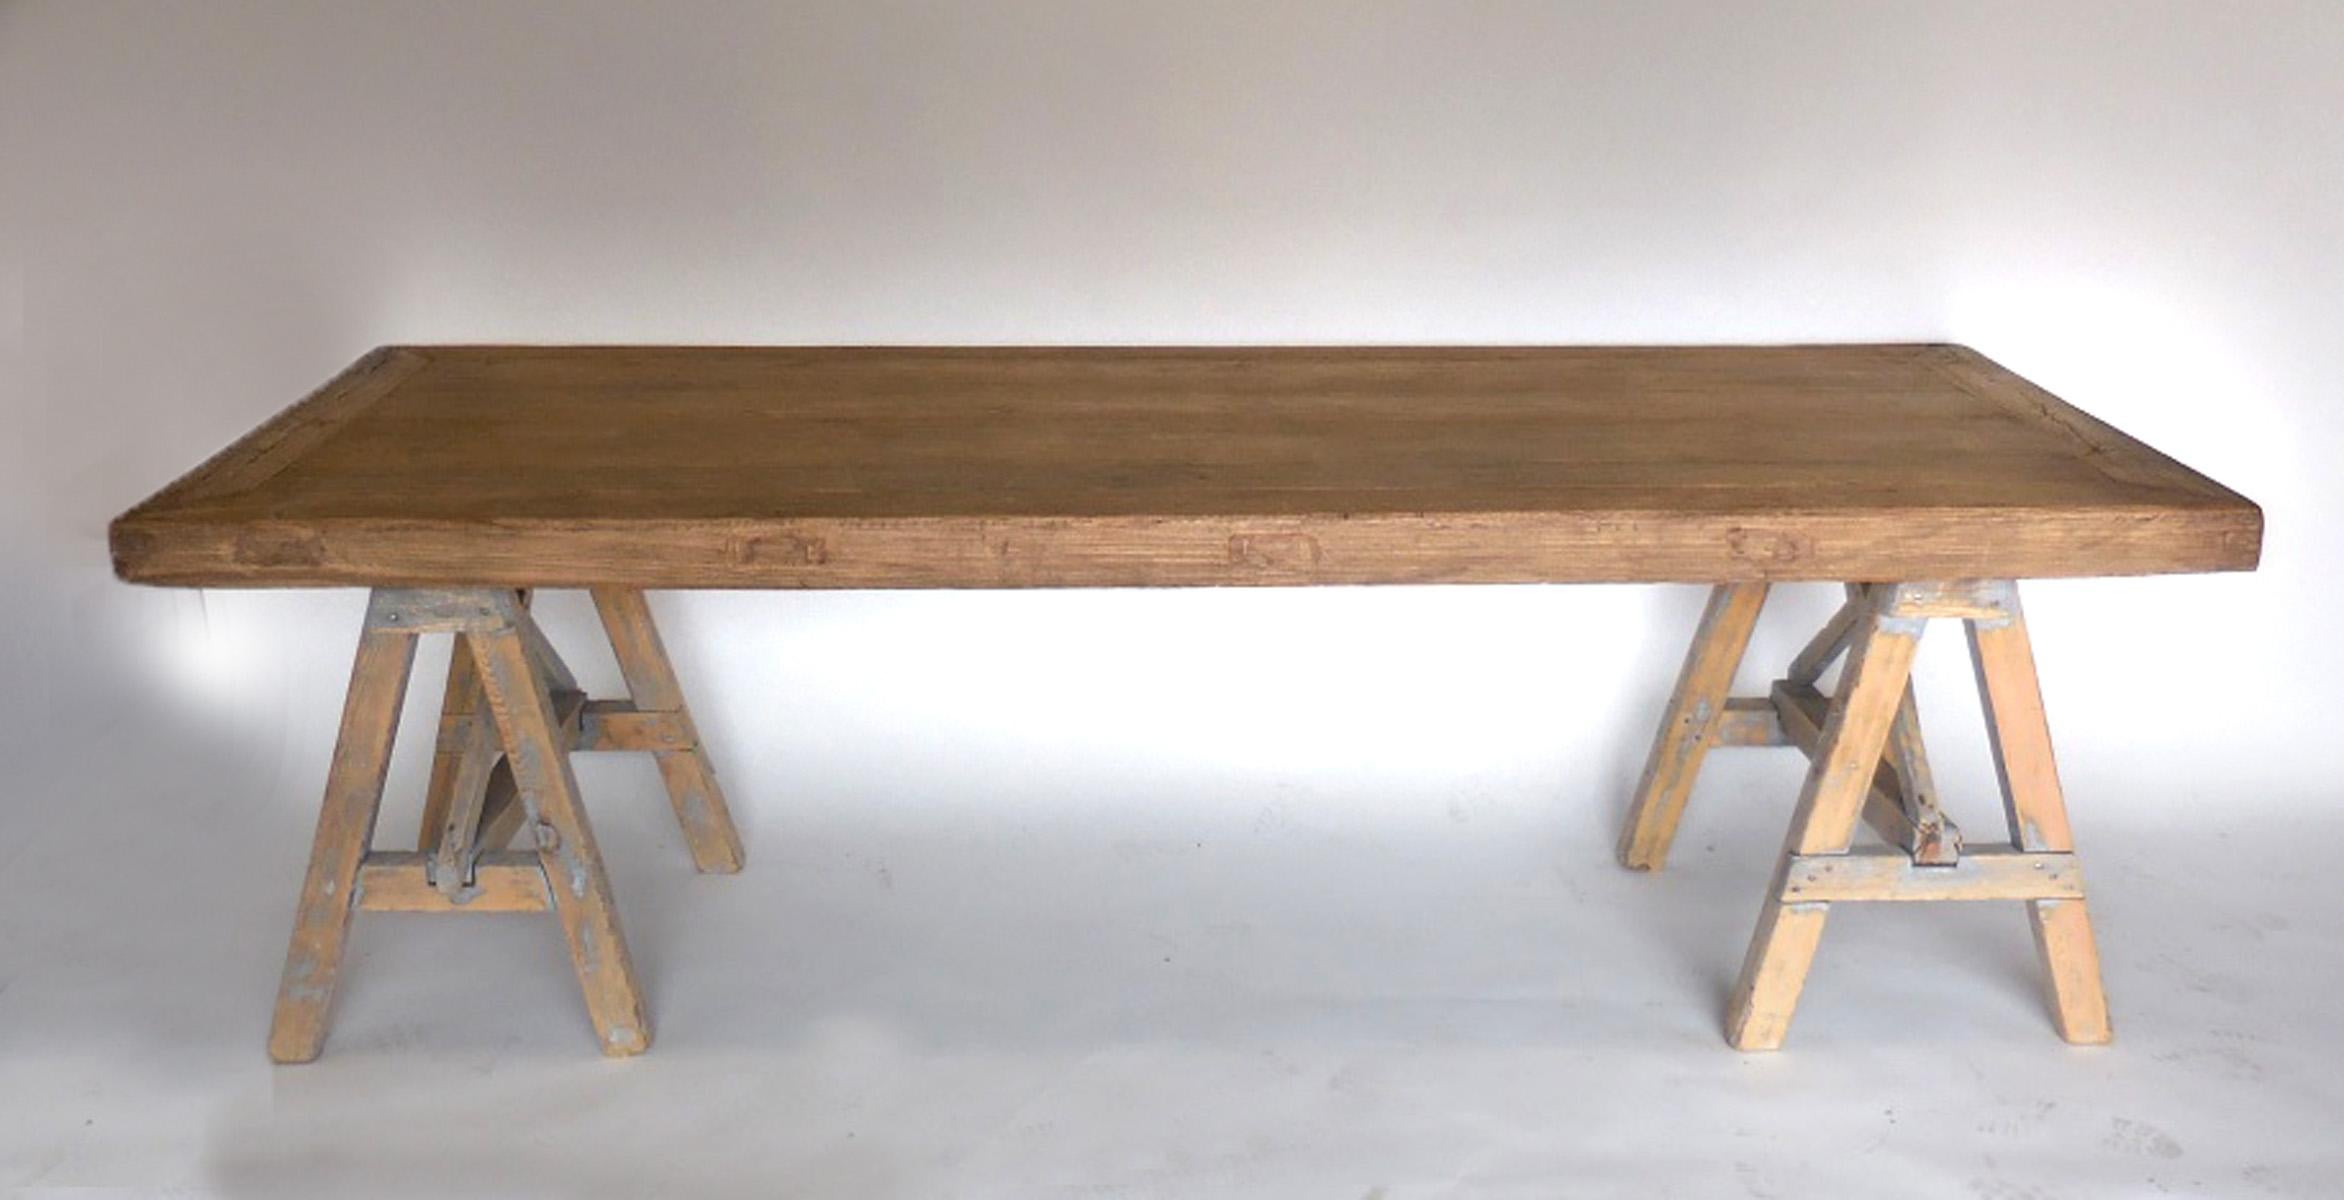 Here is a marriage of an old Japanese table top and old French pine saw horse bases. The top is beautifully constructed with mortise and tenon and the edges of the table are 3 inches thick. The graining is rich and smooth to the touch. The bases